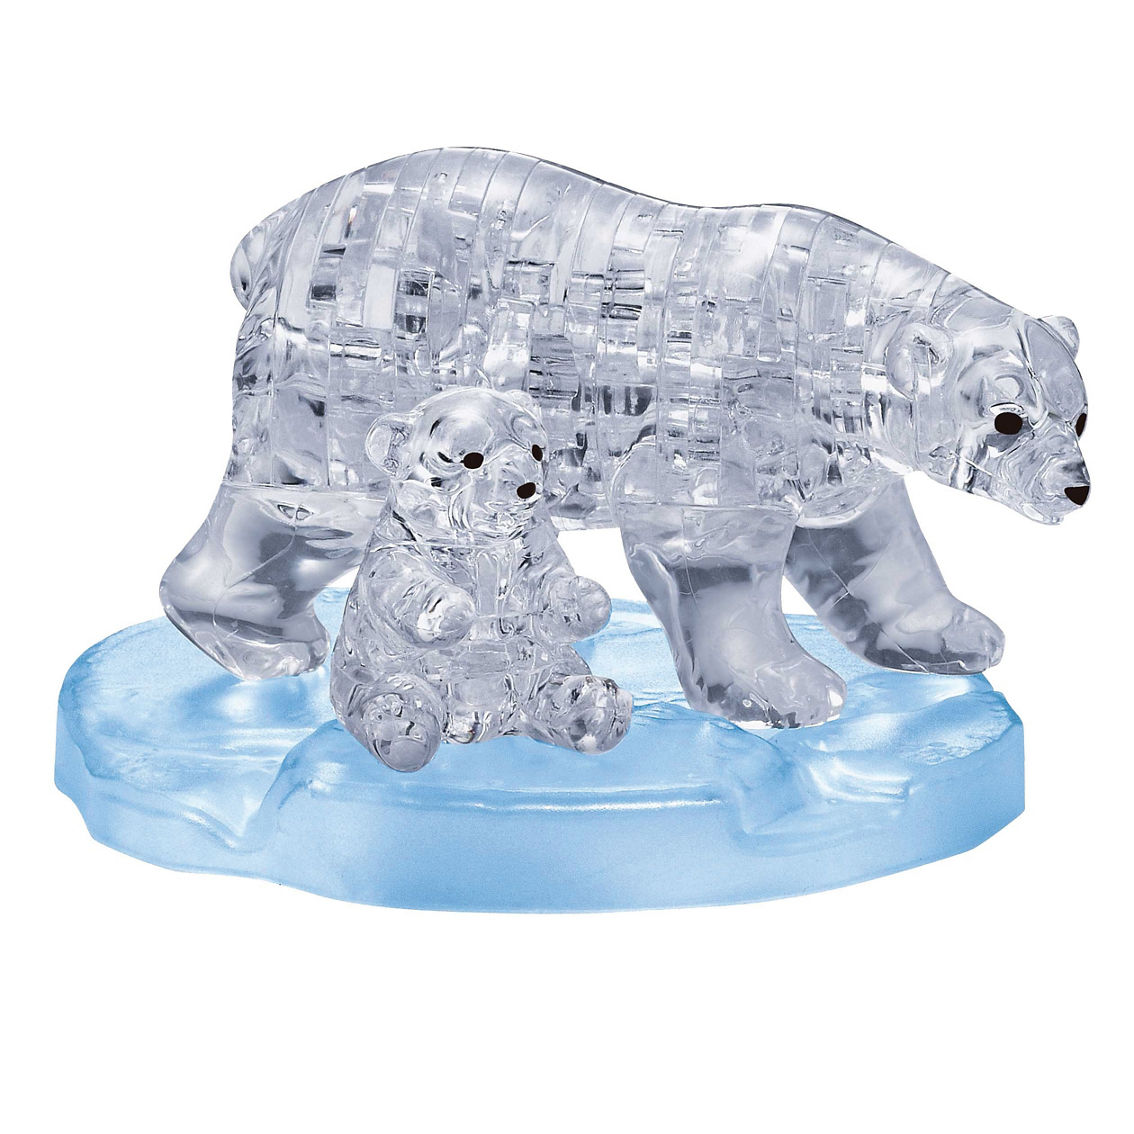 BePuzzled 3D Crystal Puzzle - Polar Bear and Baby: 40 Pcs - Image 2 of 2